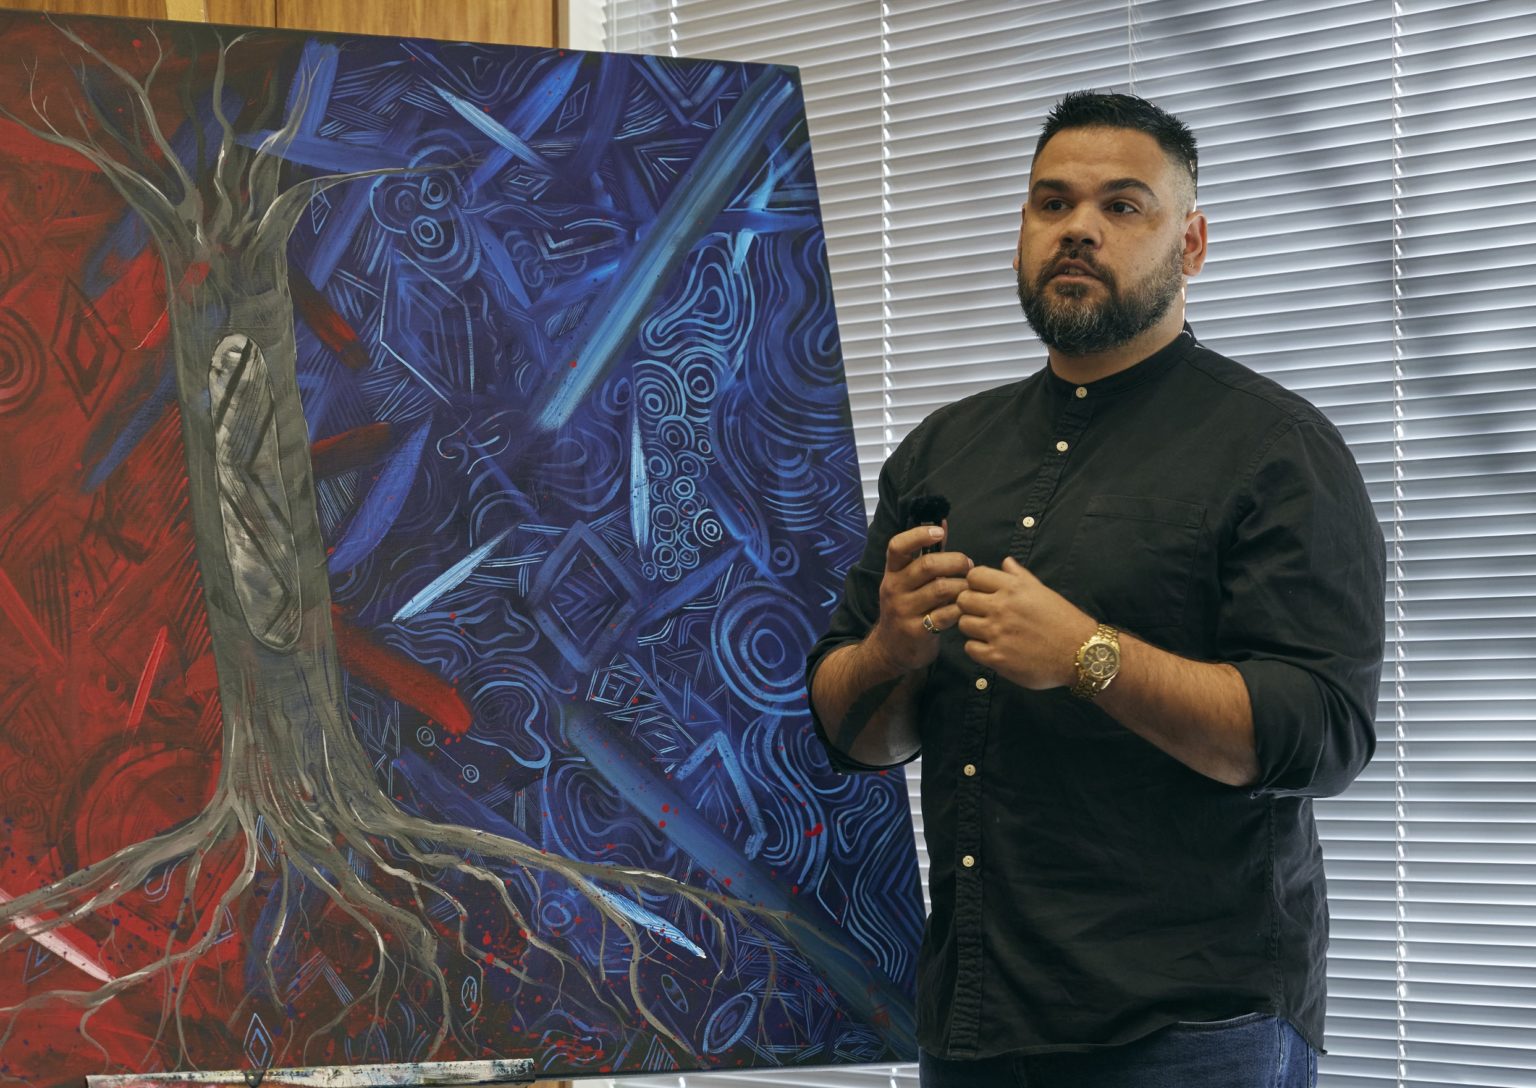 Grace unveils an Indigenous artwork created by artist, Robert Young